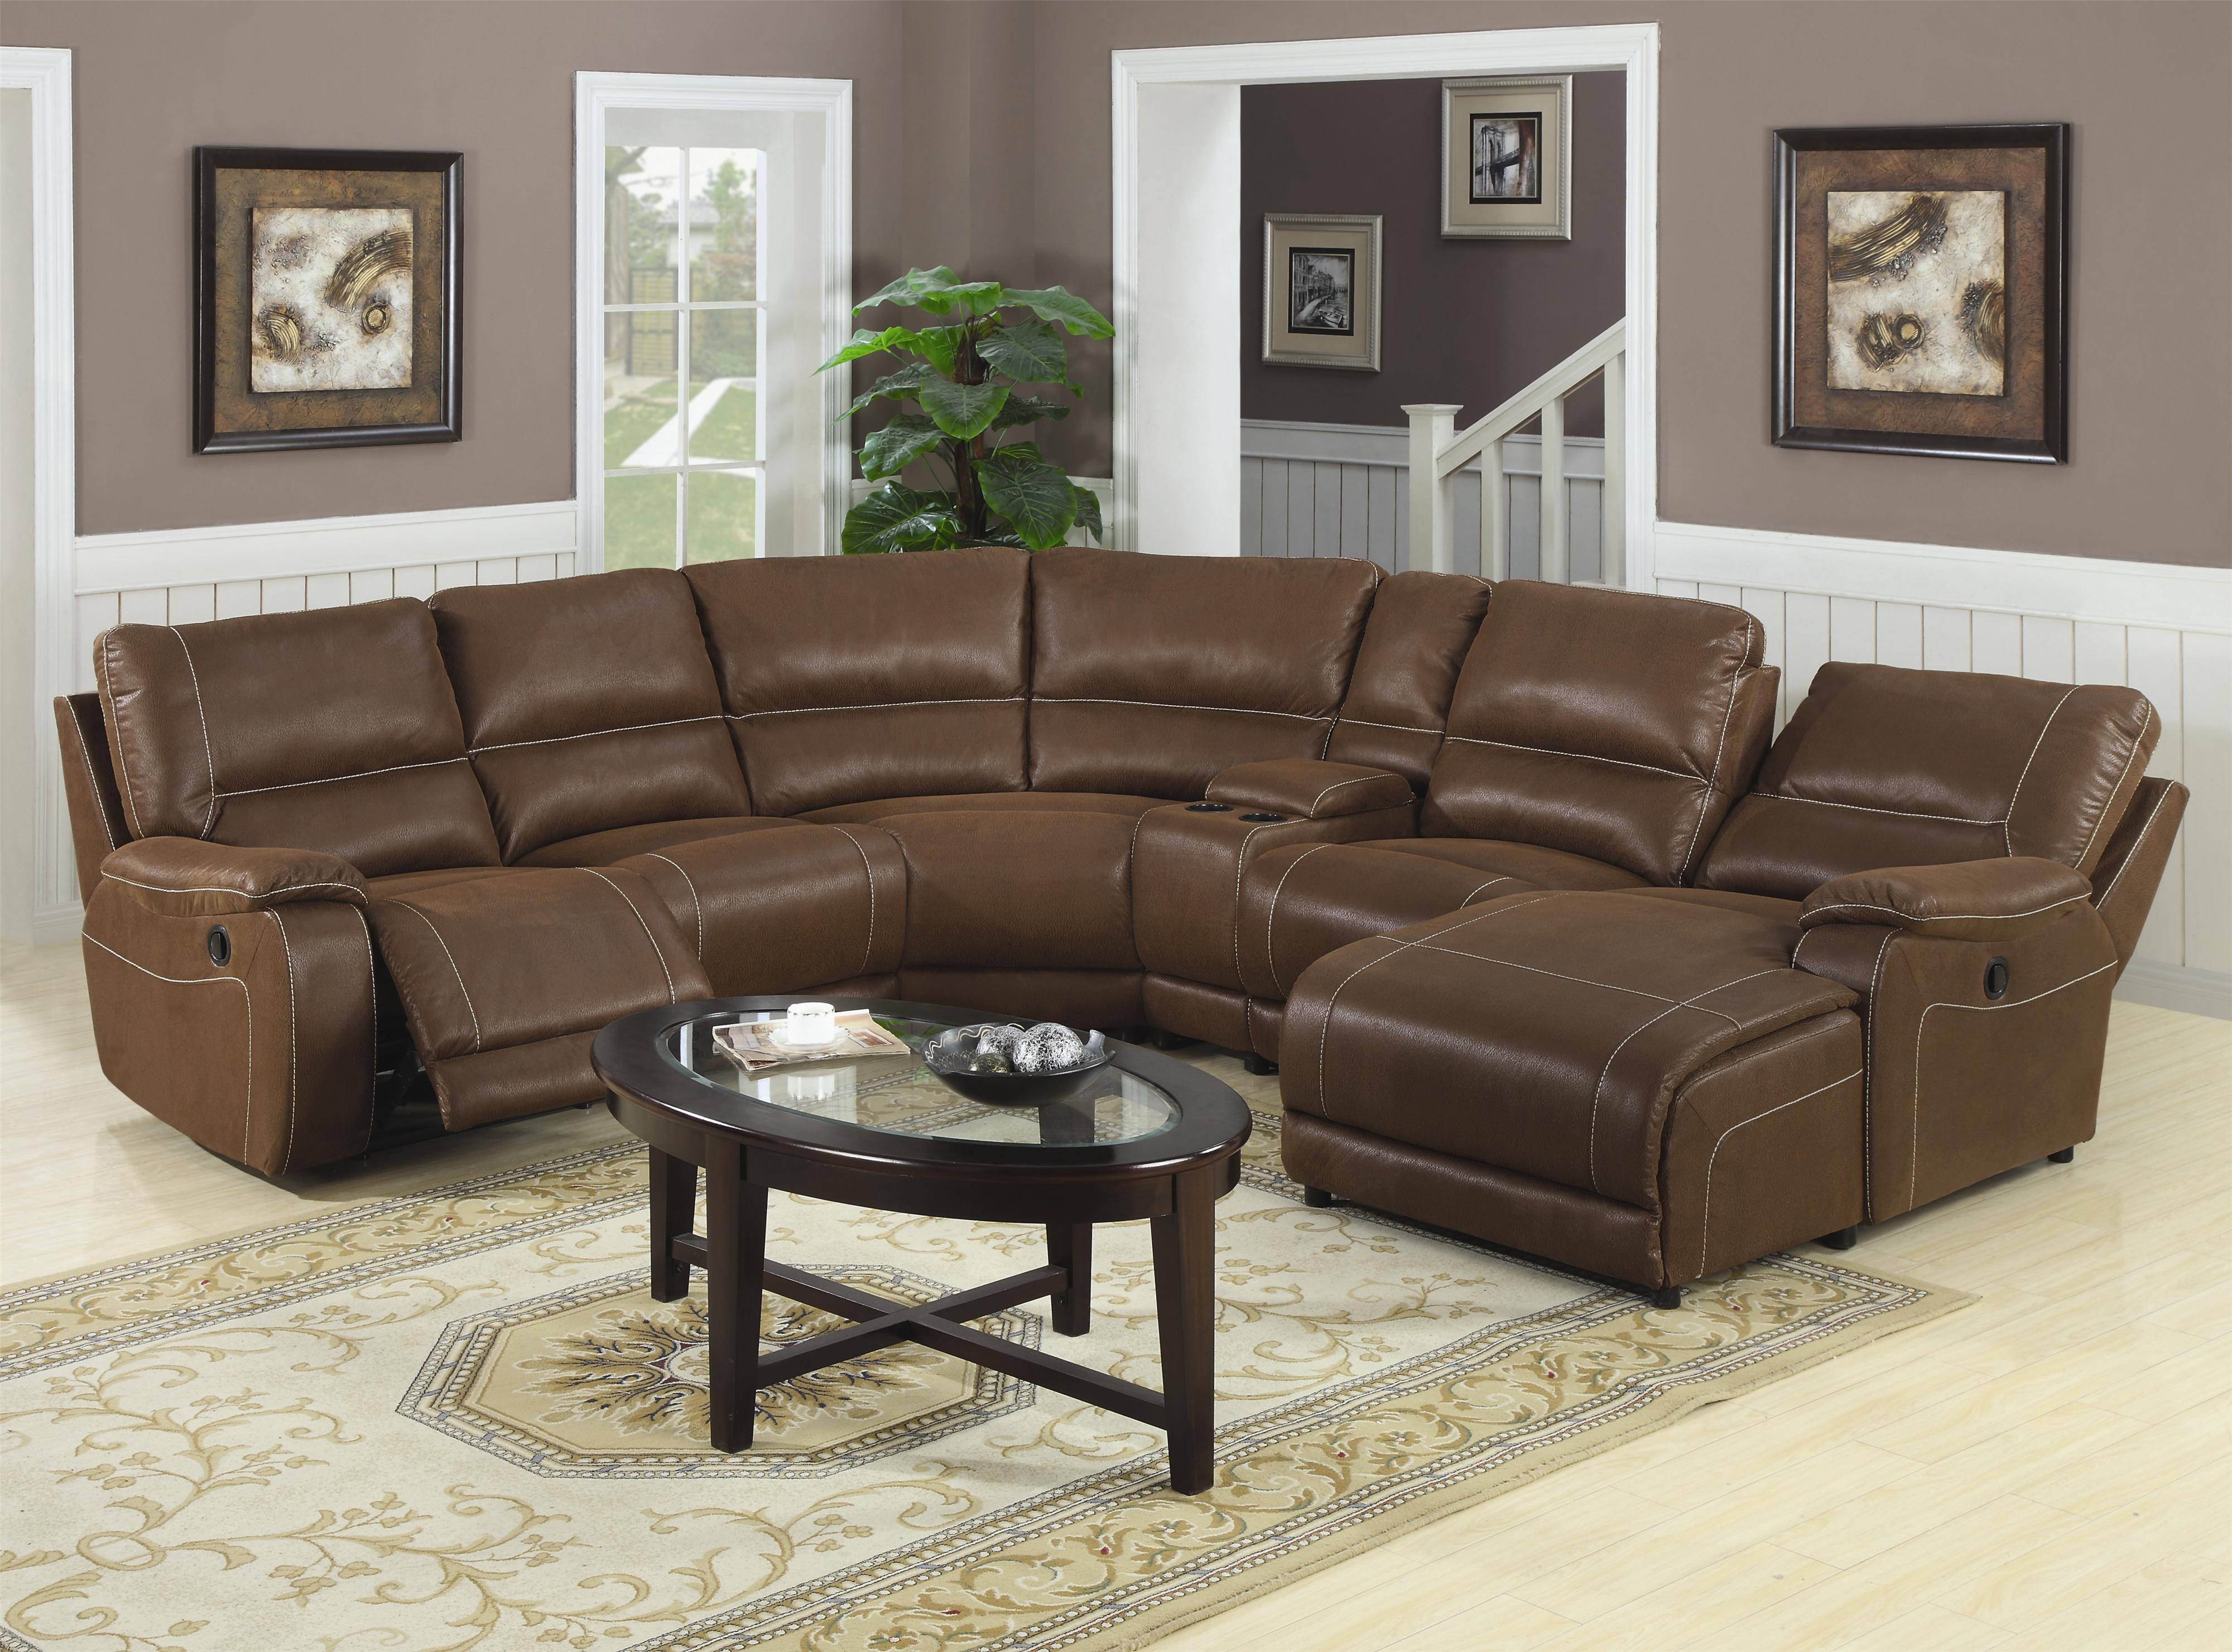 pukaski leather sectional sofa with chaise lounge